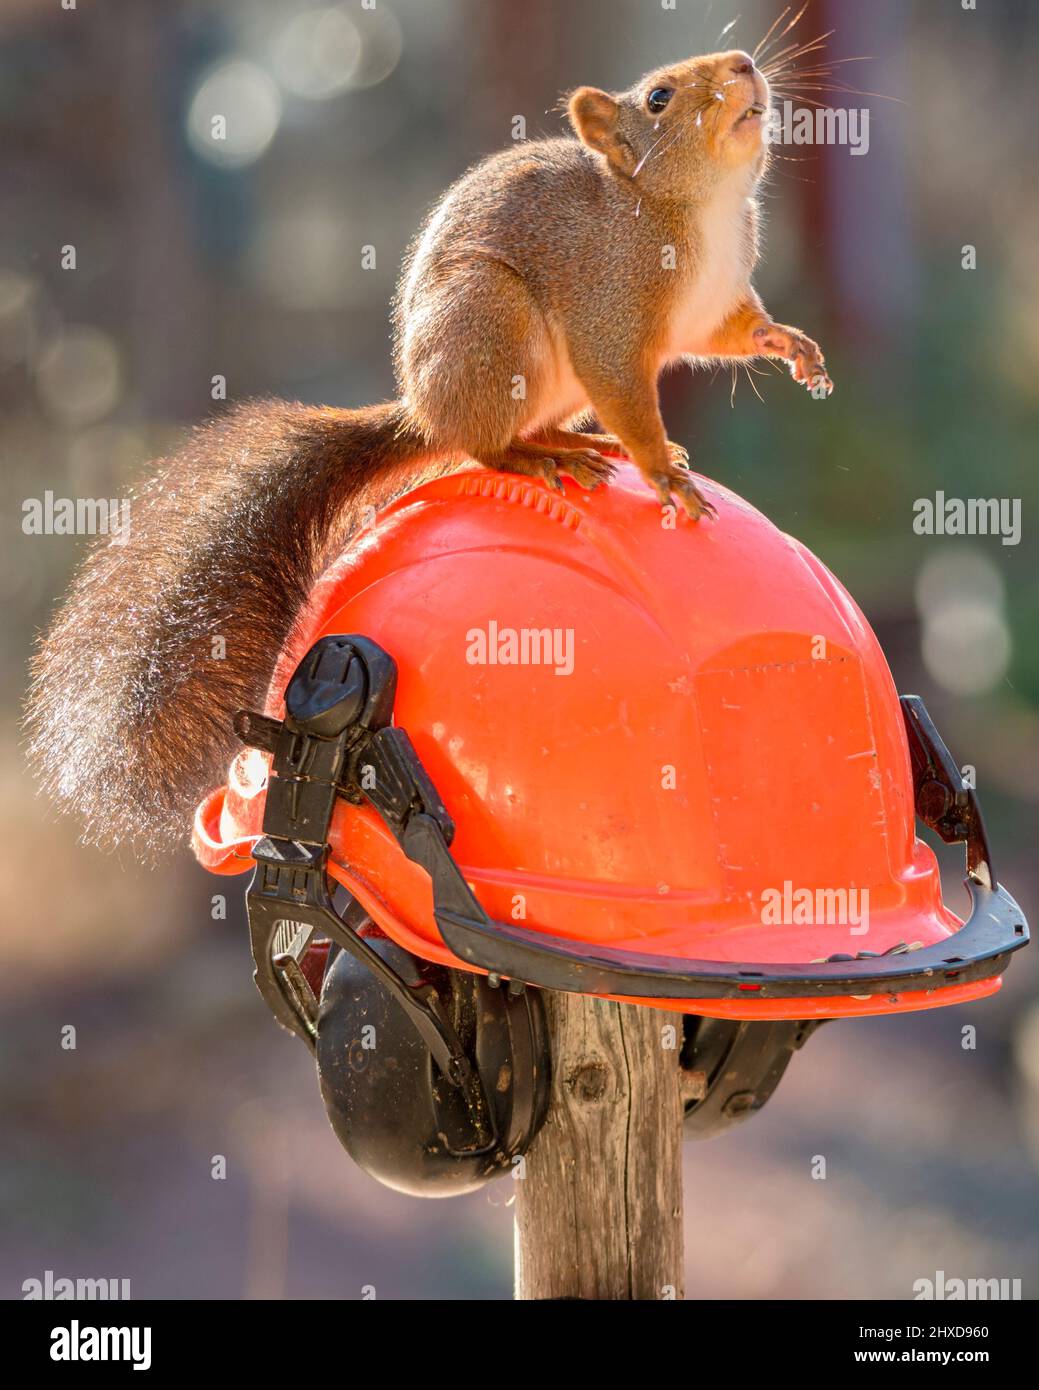 squirrel standing on red helmet with headphone Stock Photo